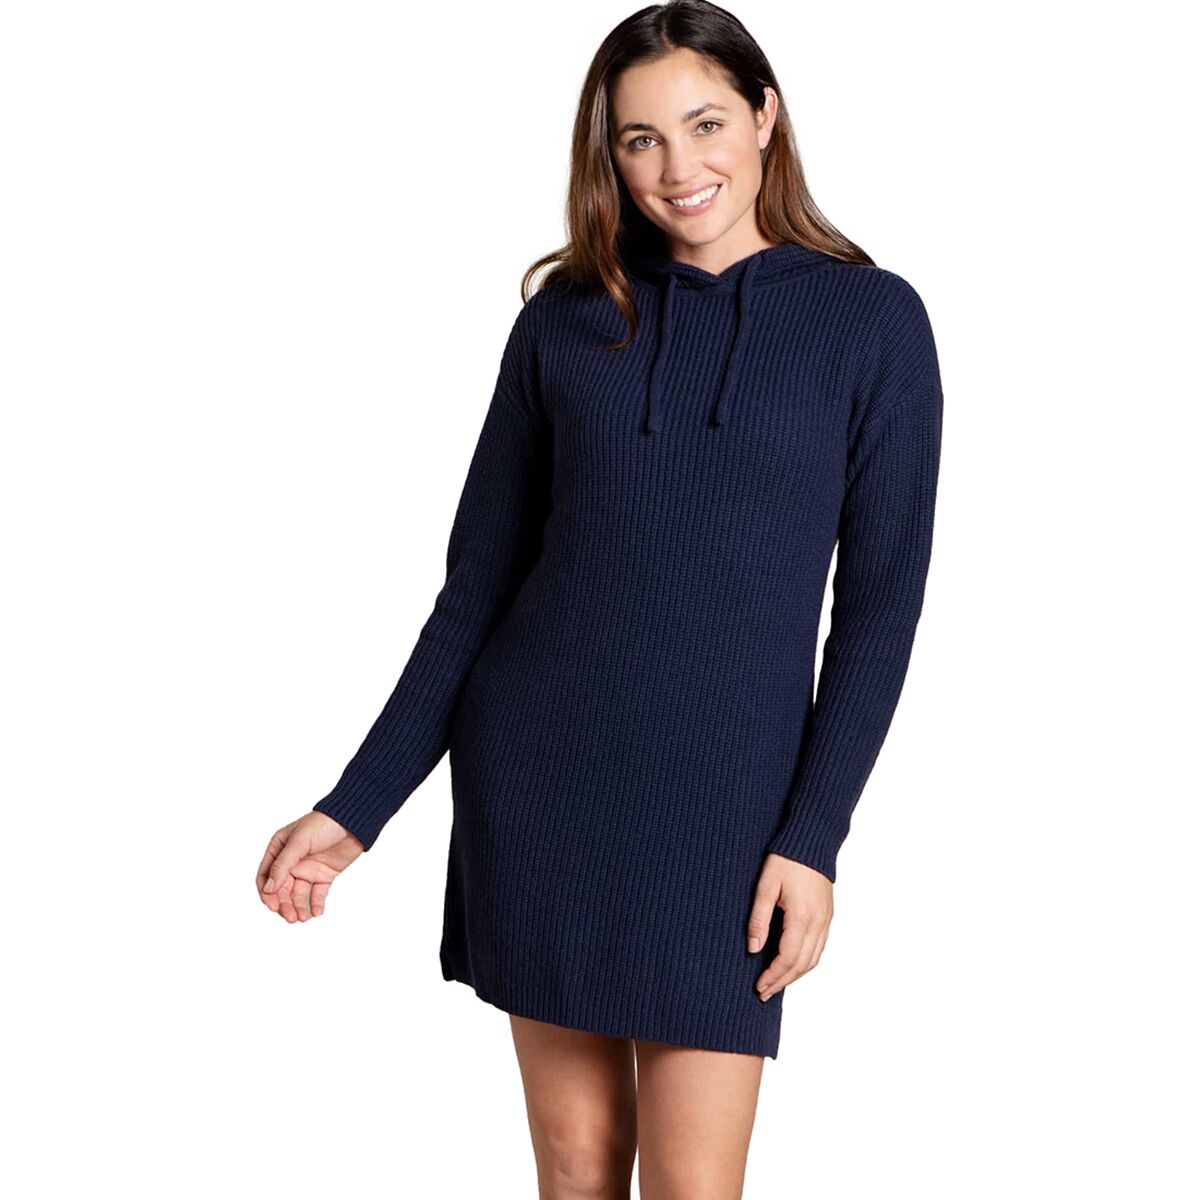 Toad&Co Whidbey Hooded Sweater Dress - Women's